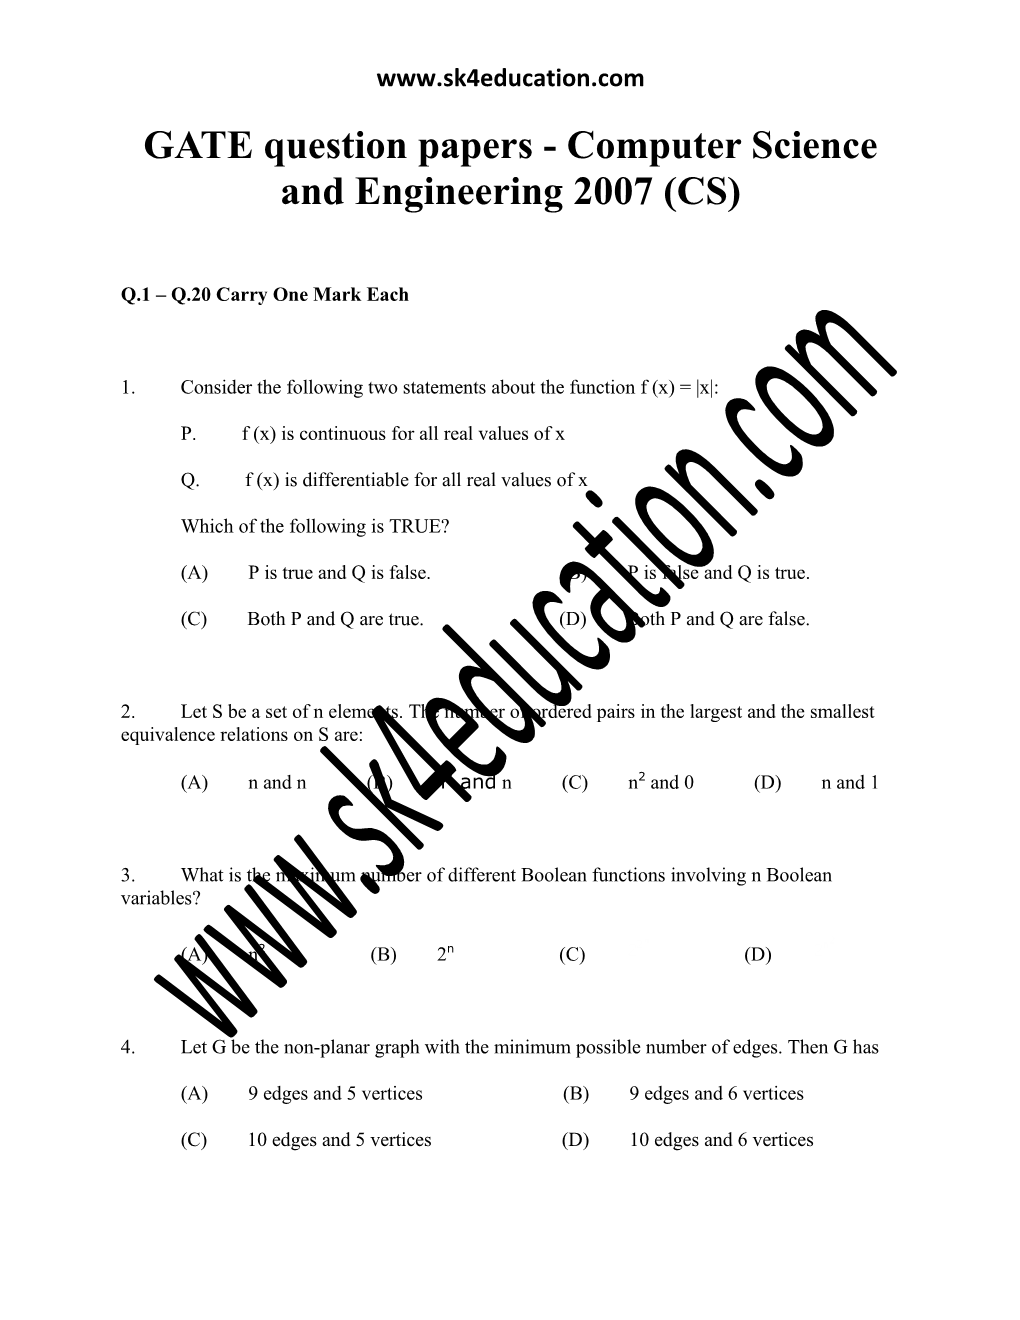 GATE Question Papers - Computer Science and Engineering 2007 (CS)